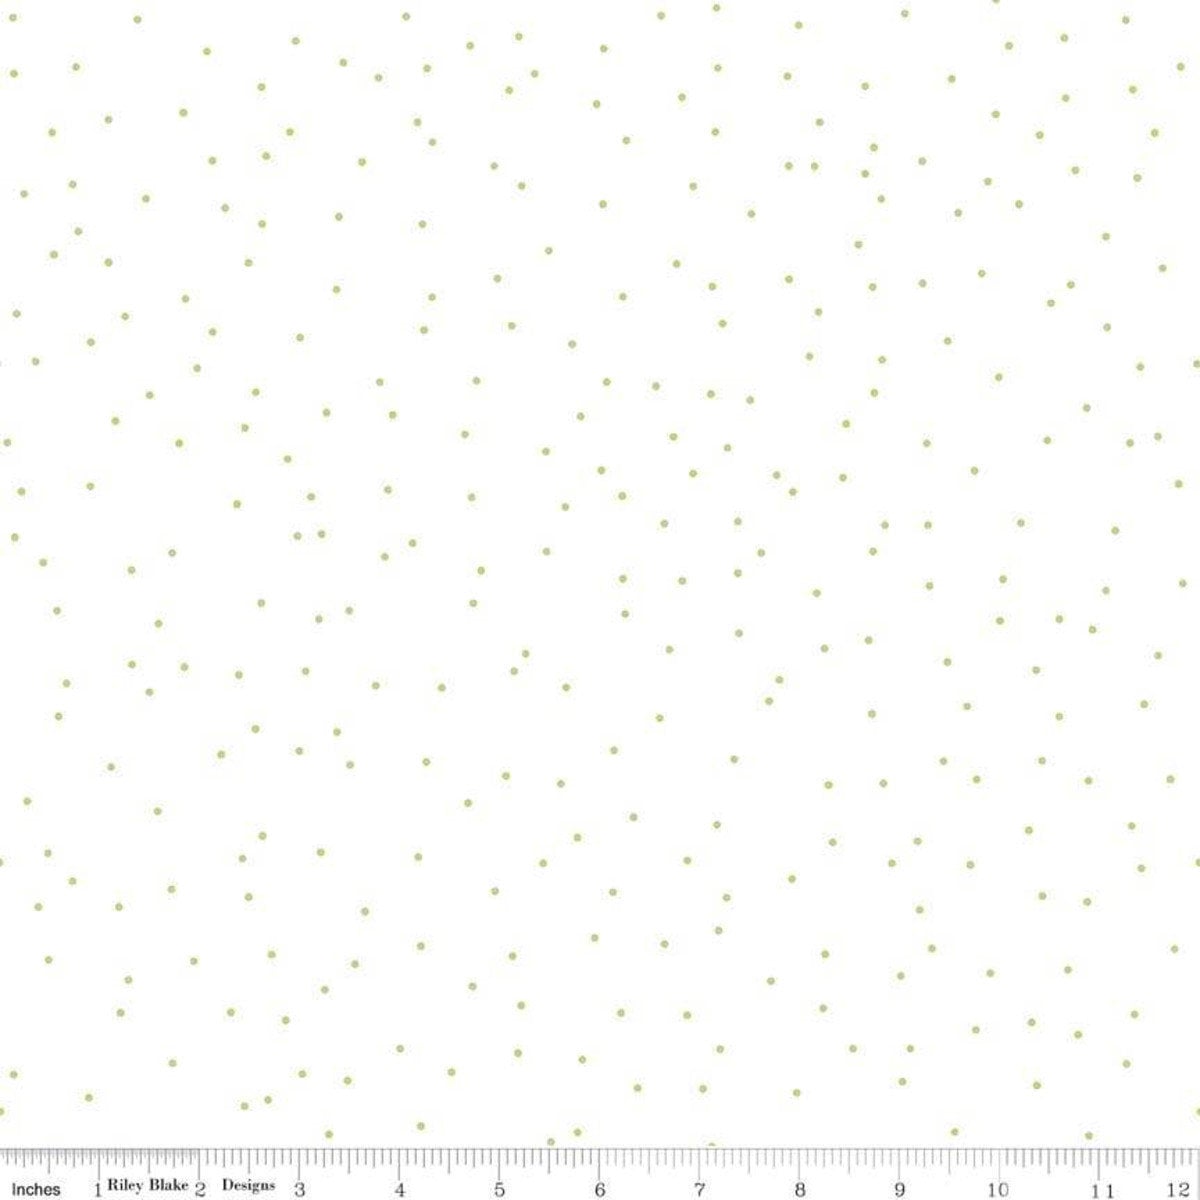 Pin Dot Green scattered on a white background designed by Lori Holt of Bee in my Bonnet for Riley Blake Designs